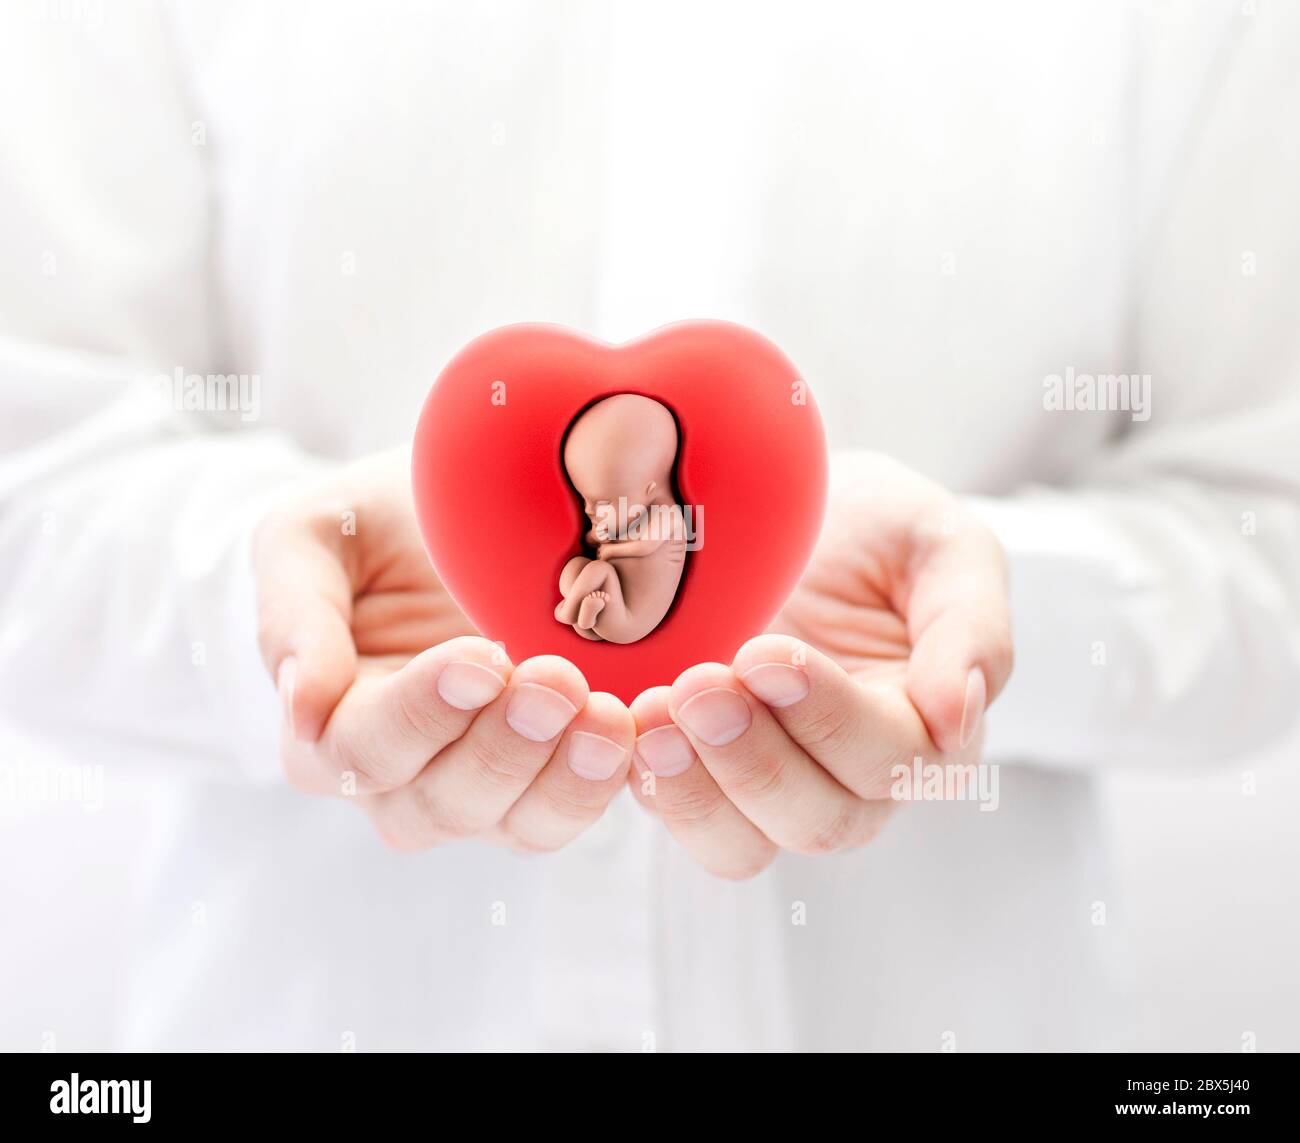 Human embryo in red heart on hands Stock Photo